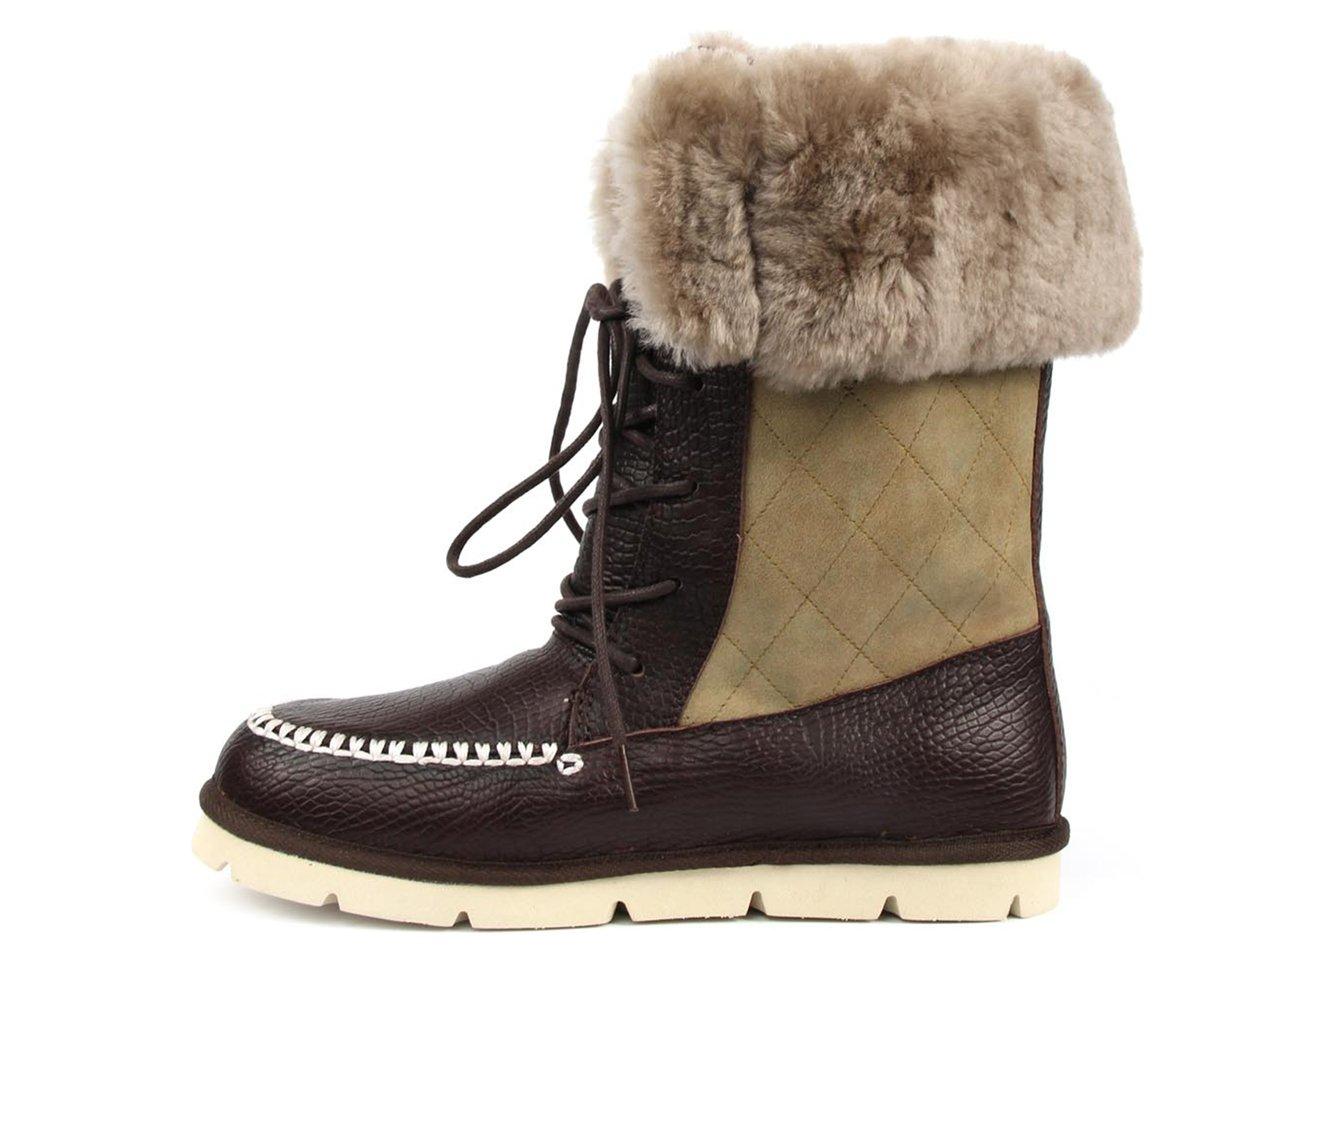 Women's Superlamb Altai Lace-Up Winter Boots